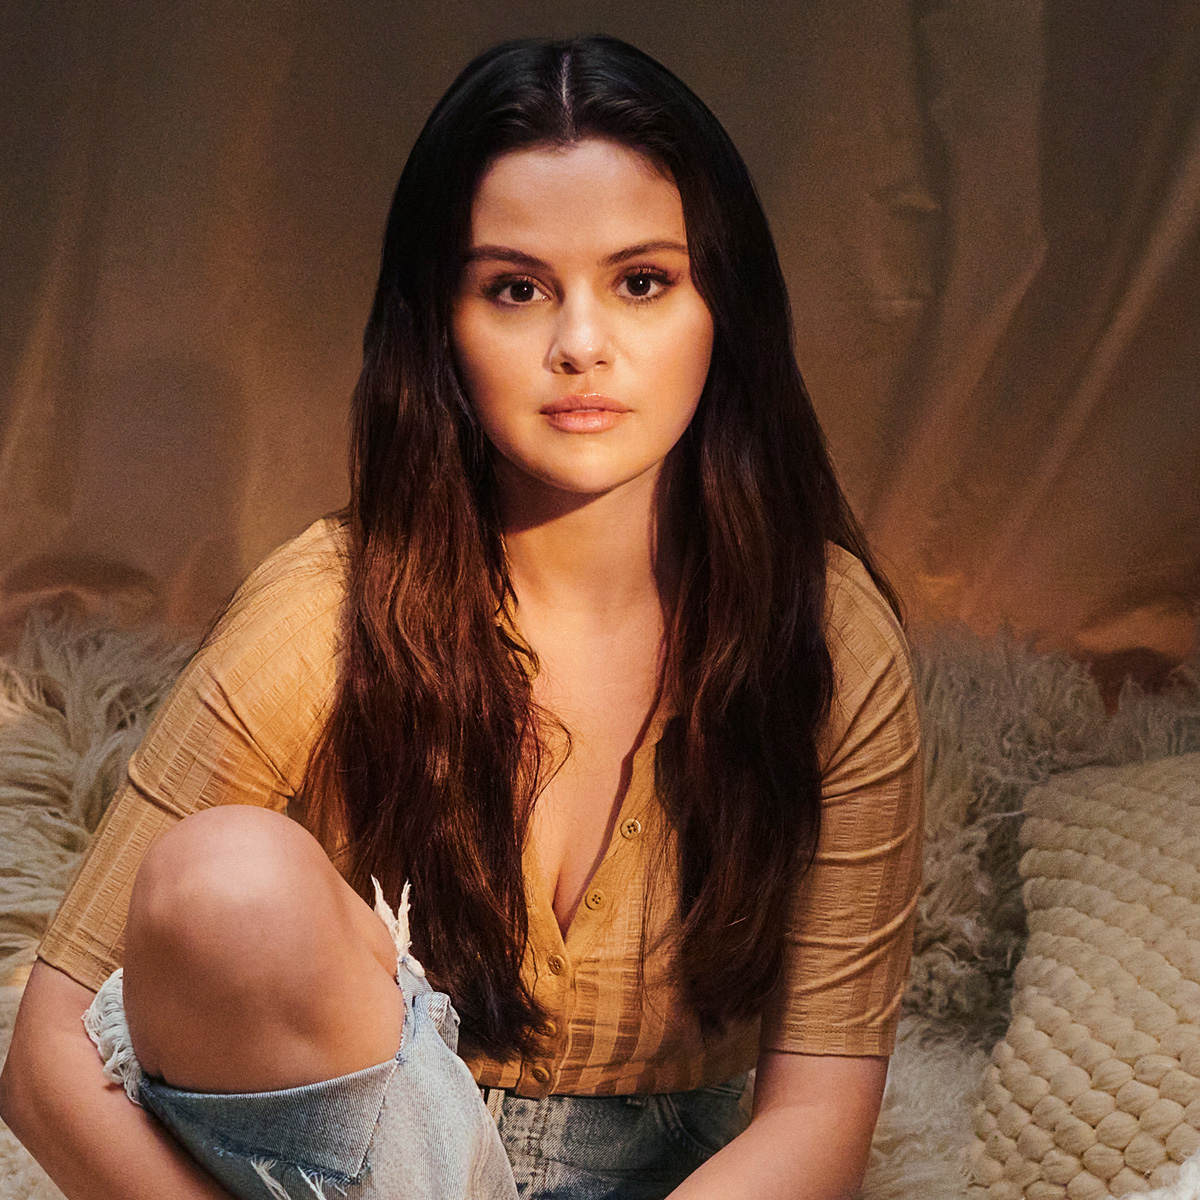 Lesbian Strapon With Selena Gomez - Selena Gomez Reveals She Had Suicidal Thoughts